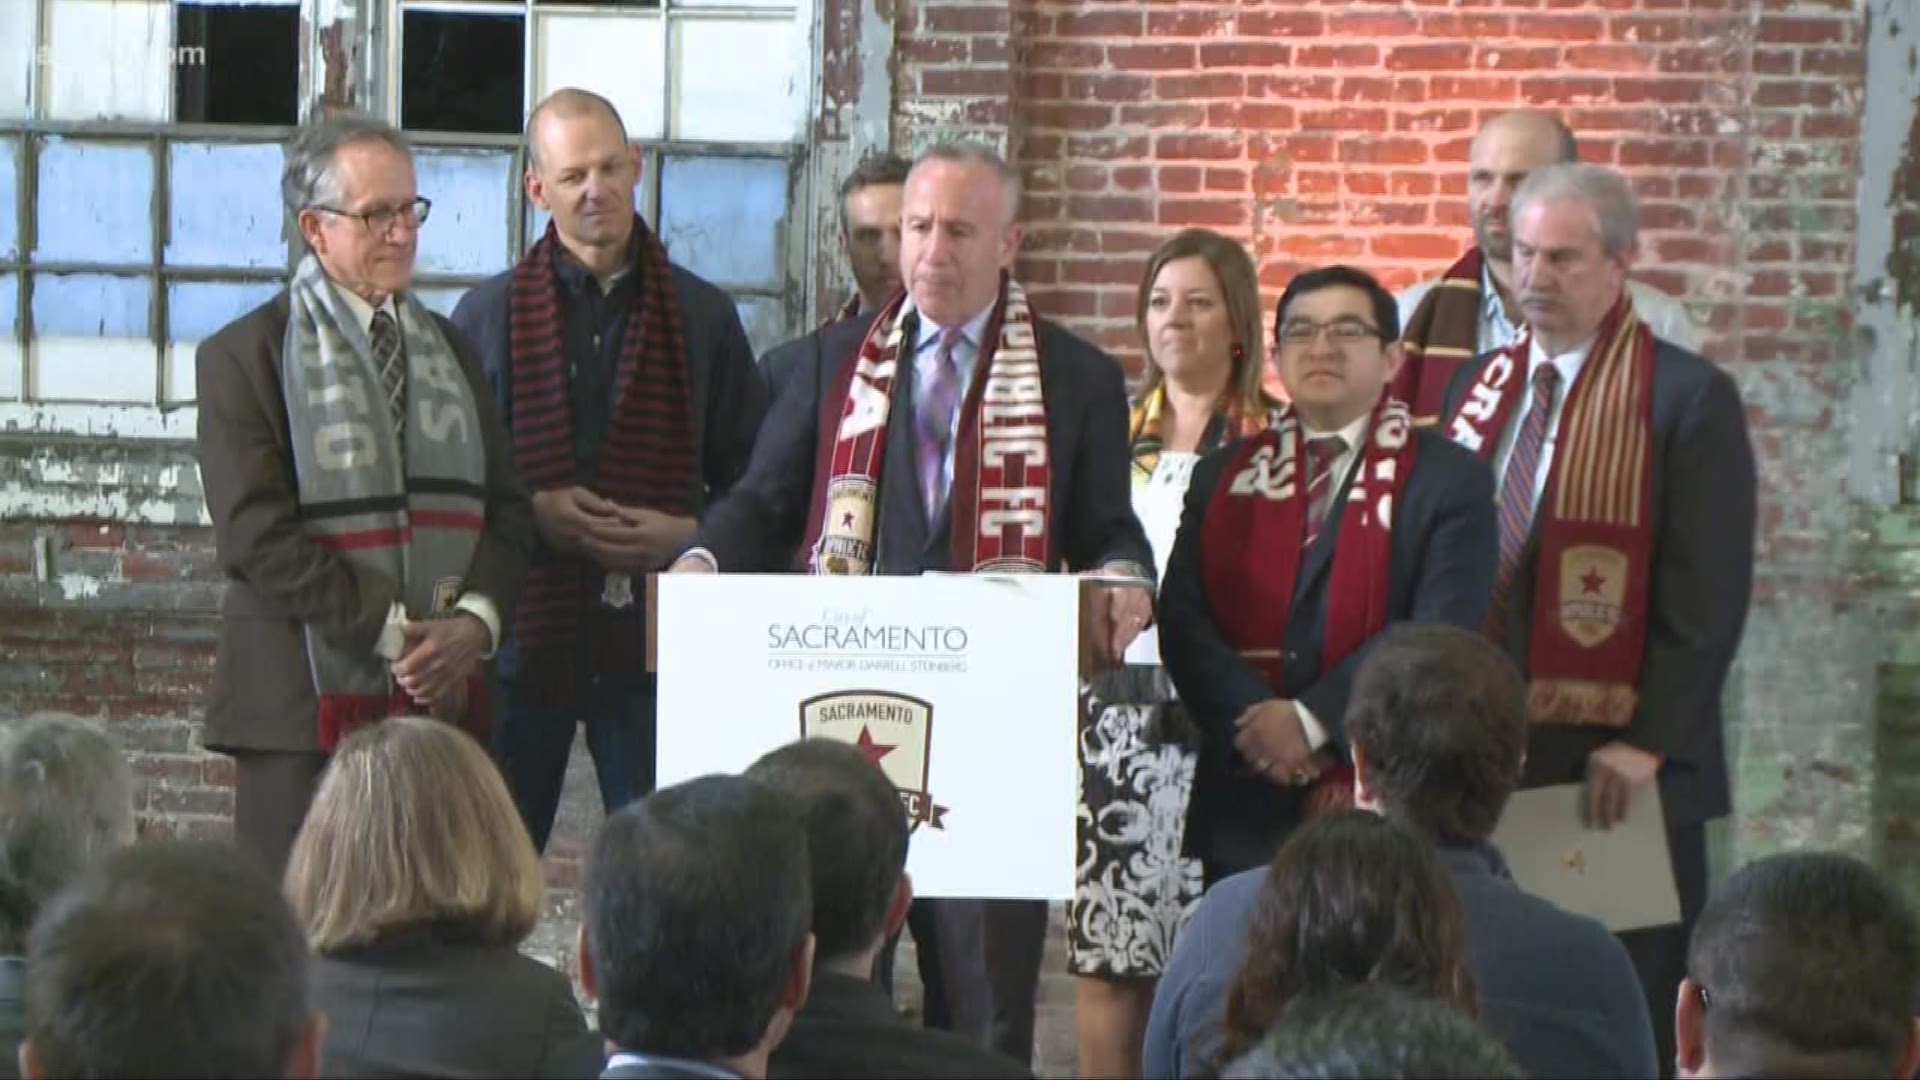 "The City will not be writing a check" for the planned soccer stadium, Mayor Derrel Steinberg said at a press conference Friday. The City estimates that the building of the stadium could bring up to 2,600 construction jobs to Sacramento. Part of the deal includes having Sacramento Republic FC work with youth in the community.